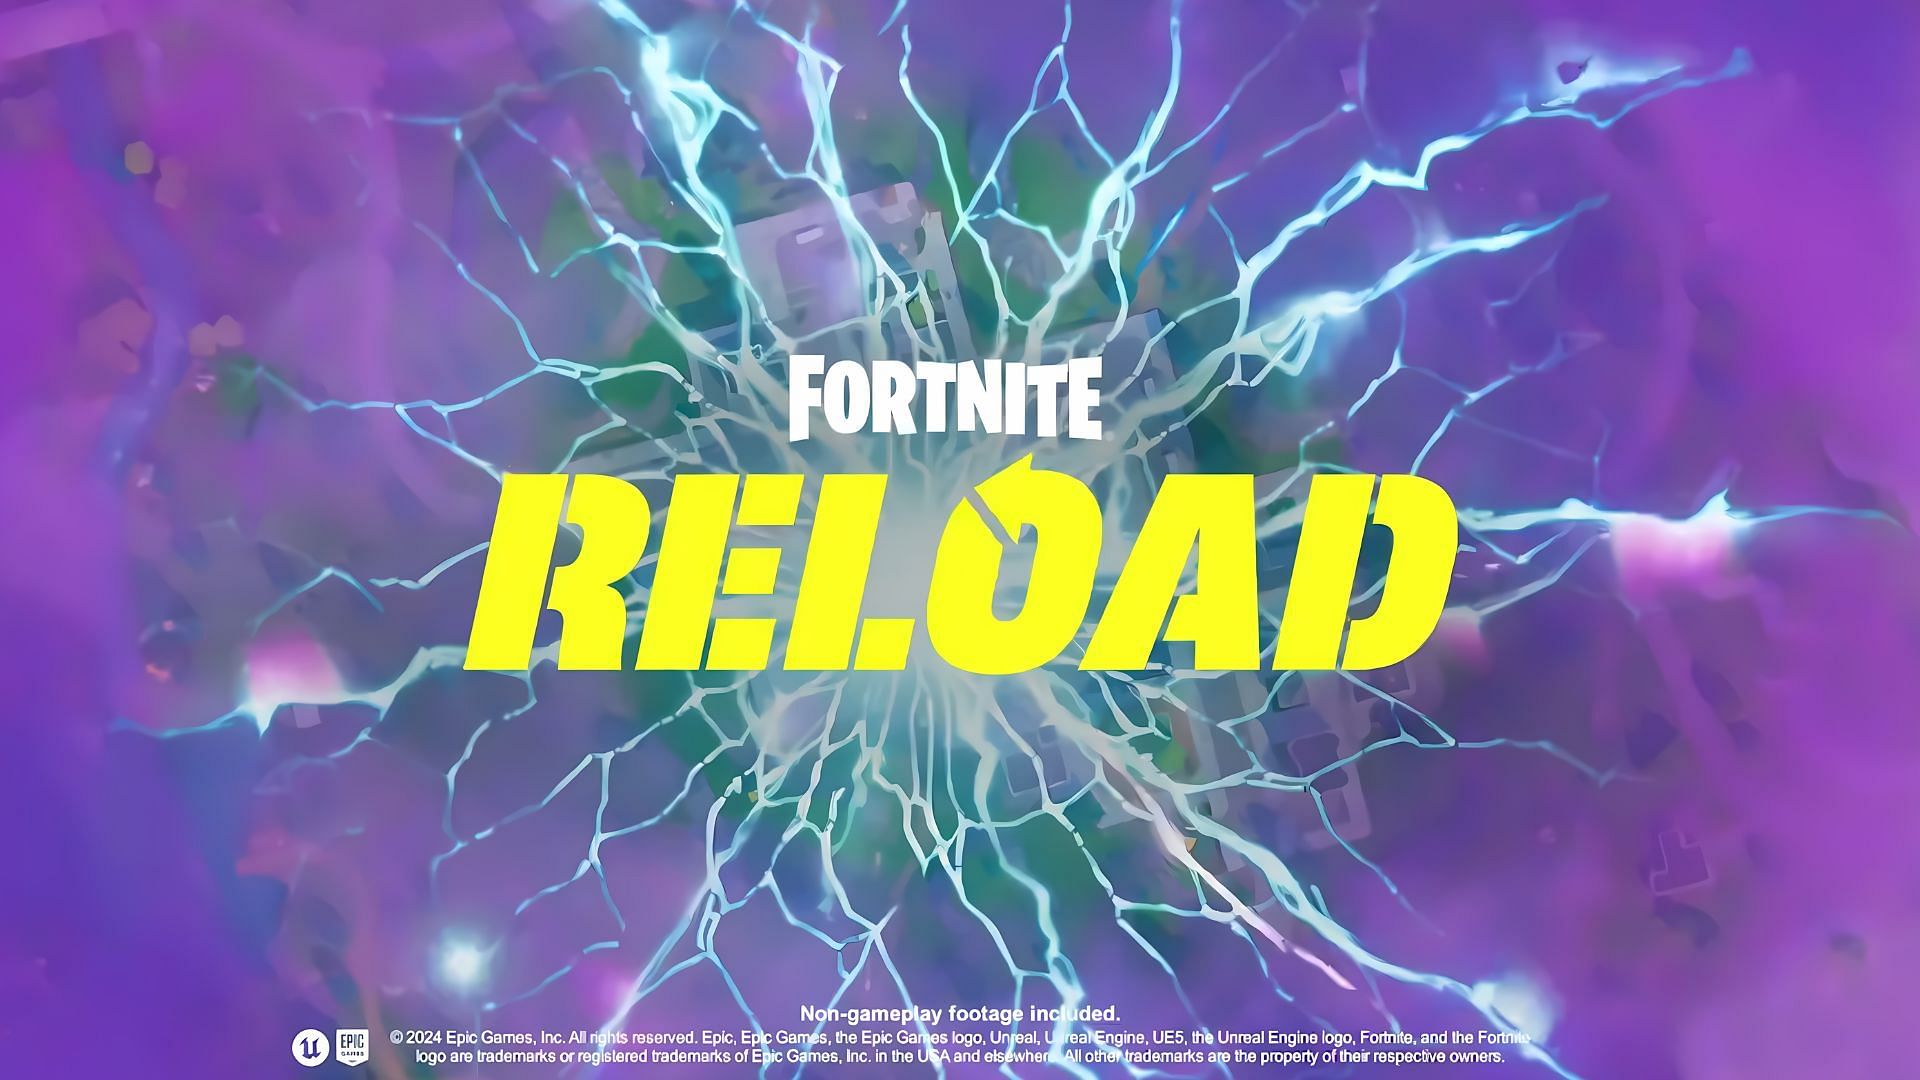 Tilted Towers returns, Epic Games announces Fortnite Reloaded 